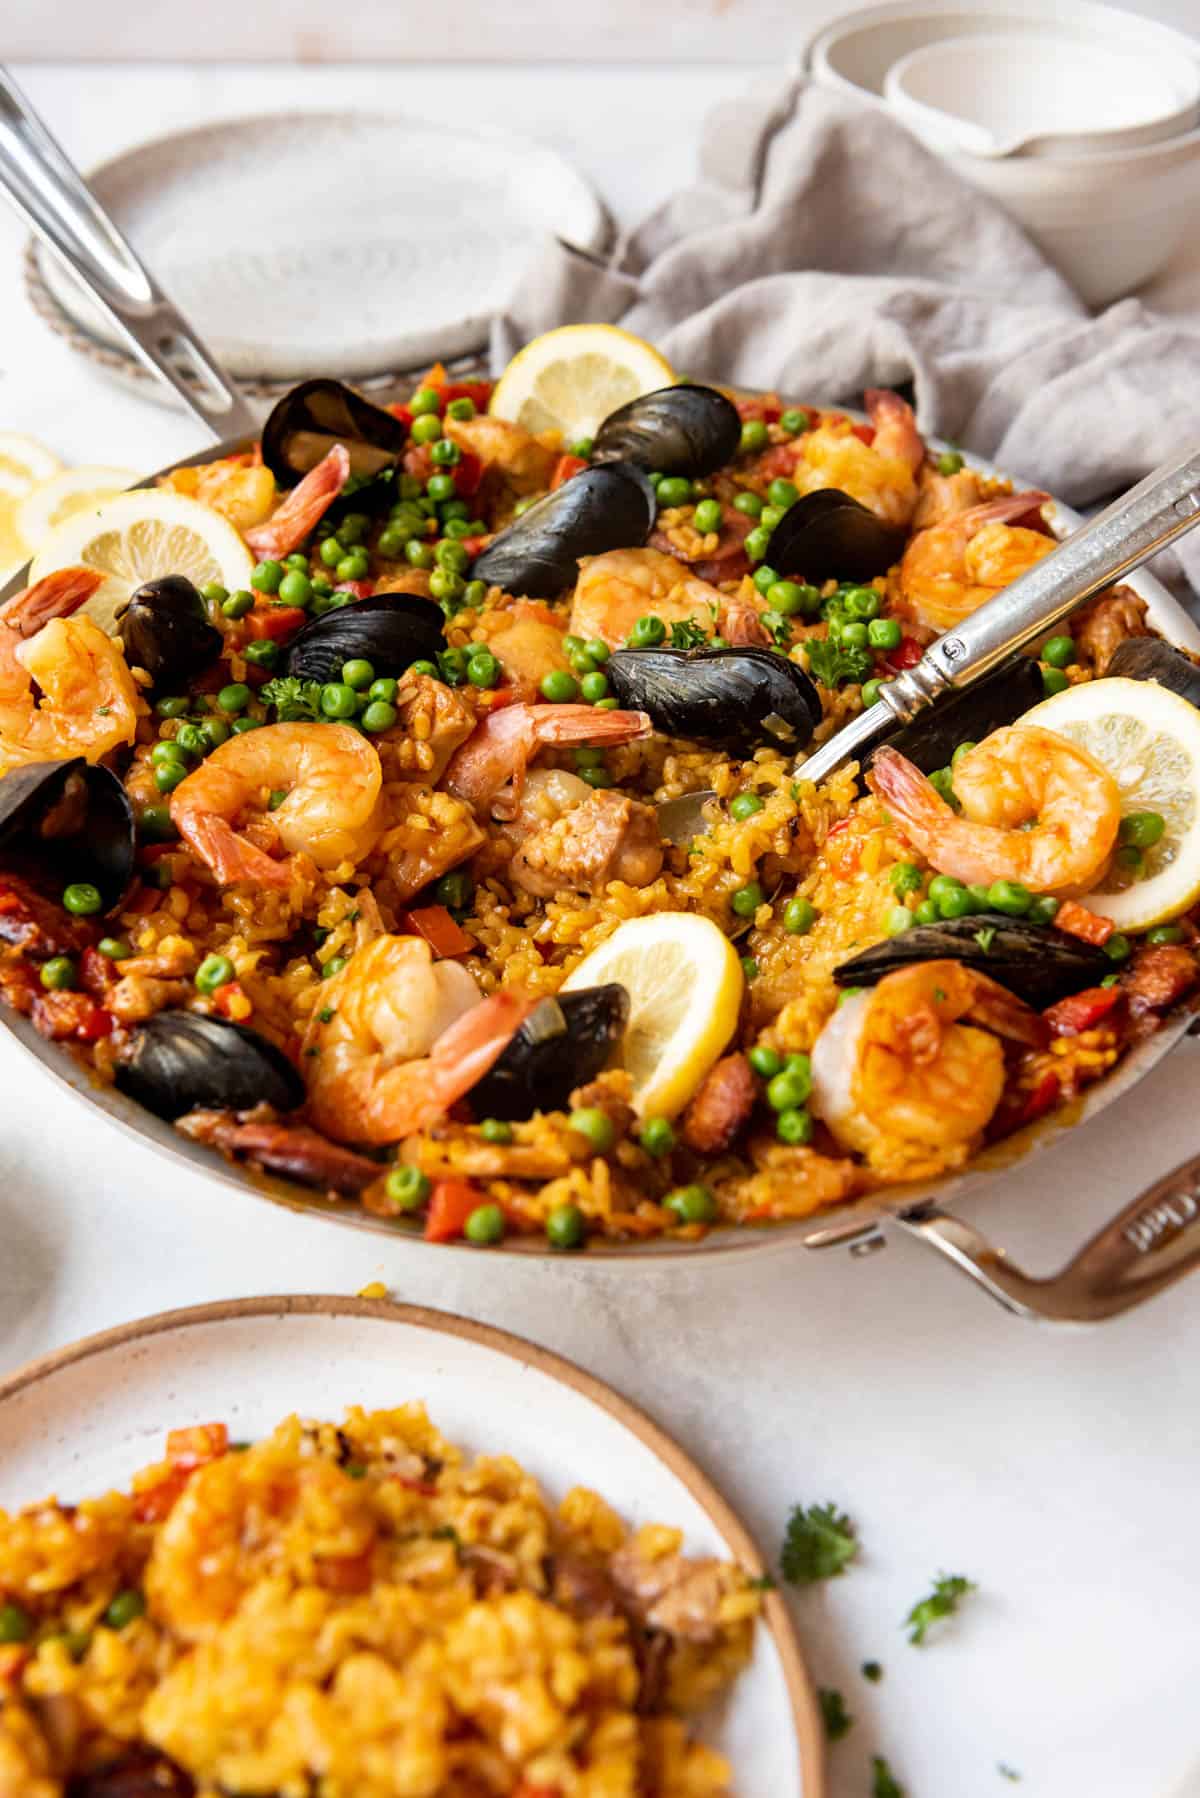 A pan of mixed Spanish paella with a serving spoon in it next to a plate of paella.